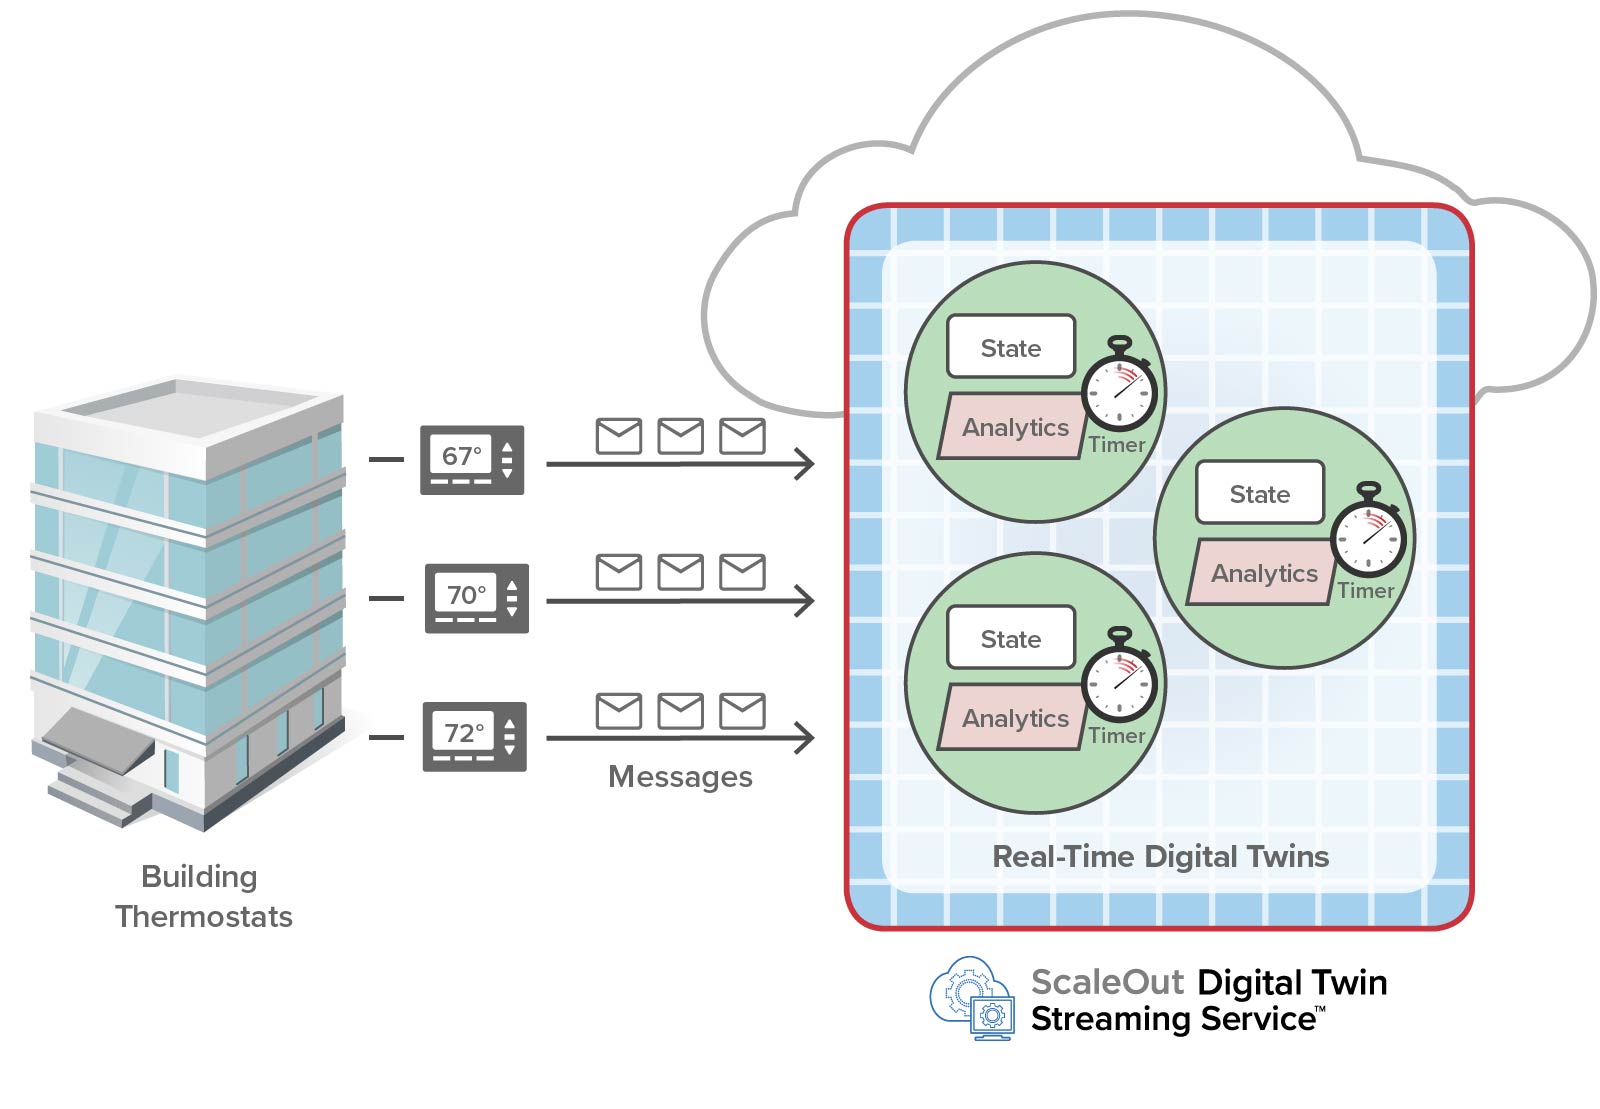 Digital twins can use timers to detect failed devices, such as temperature sensors.